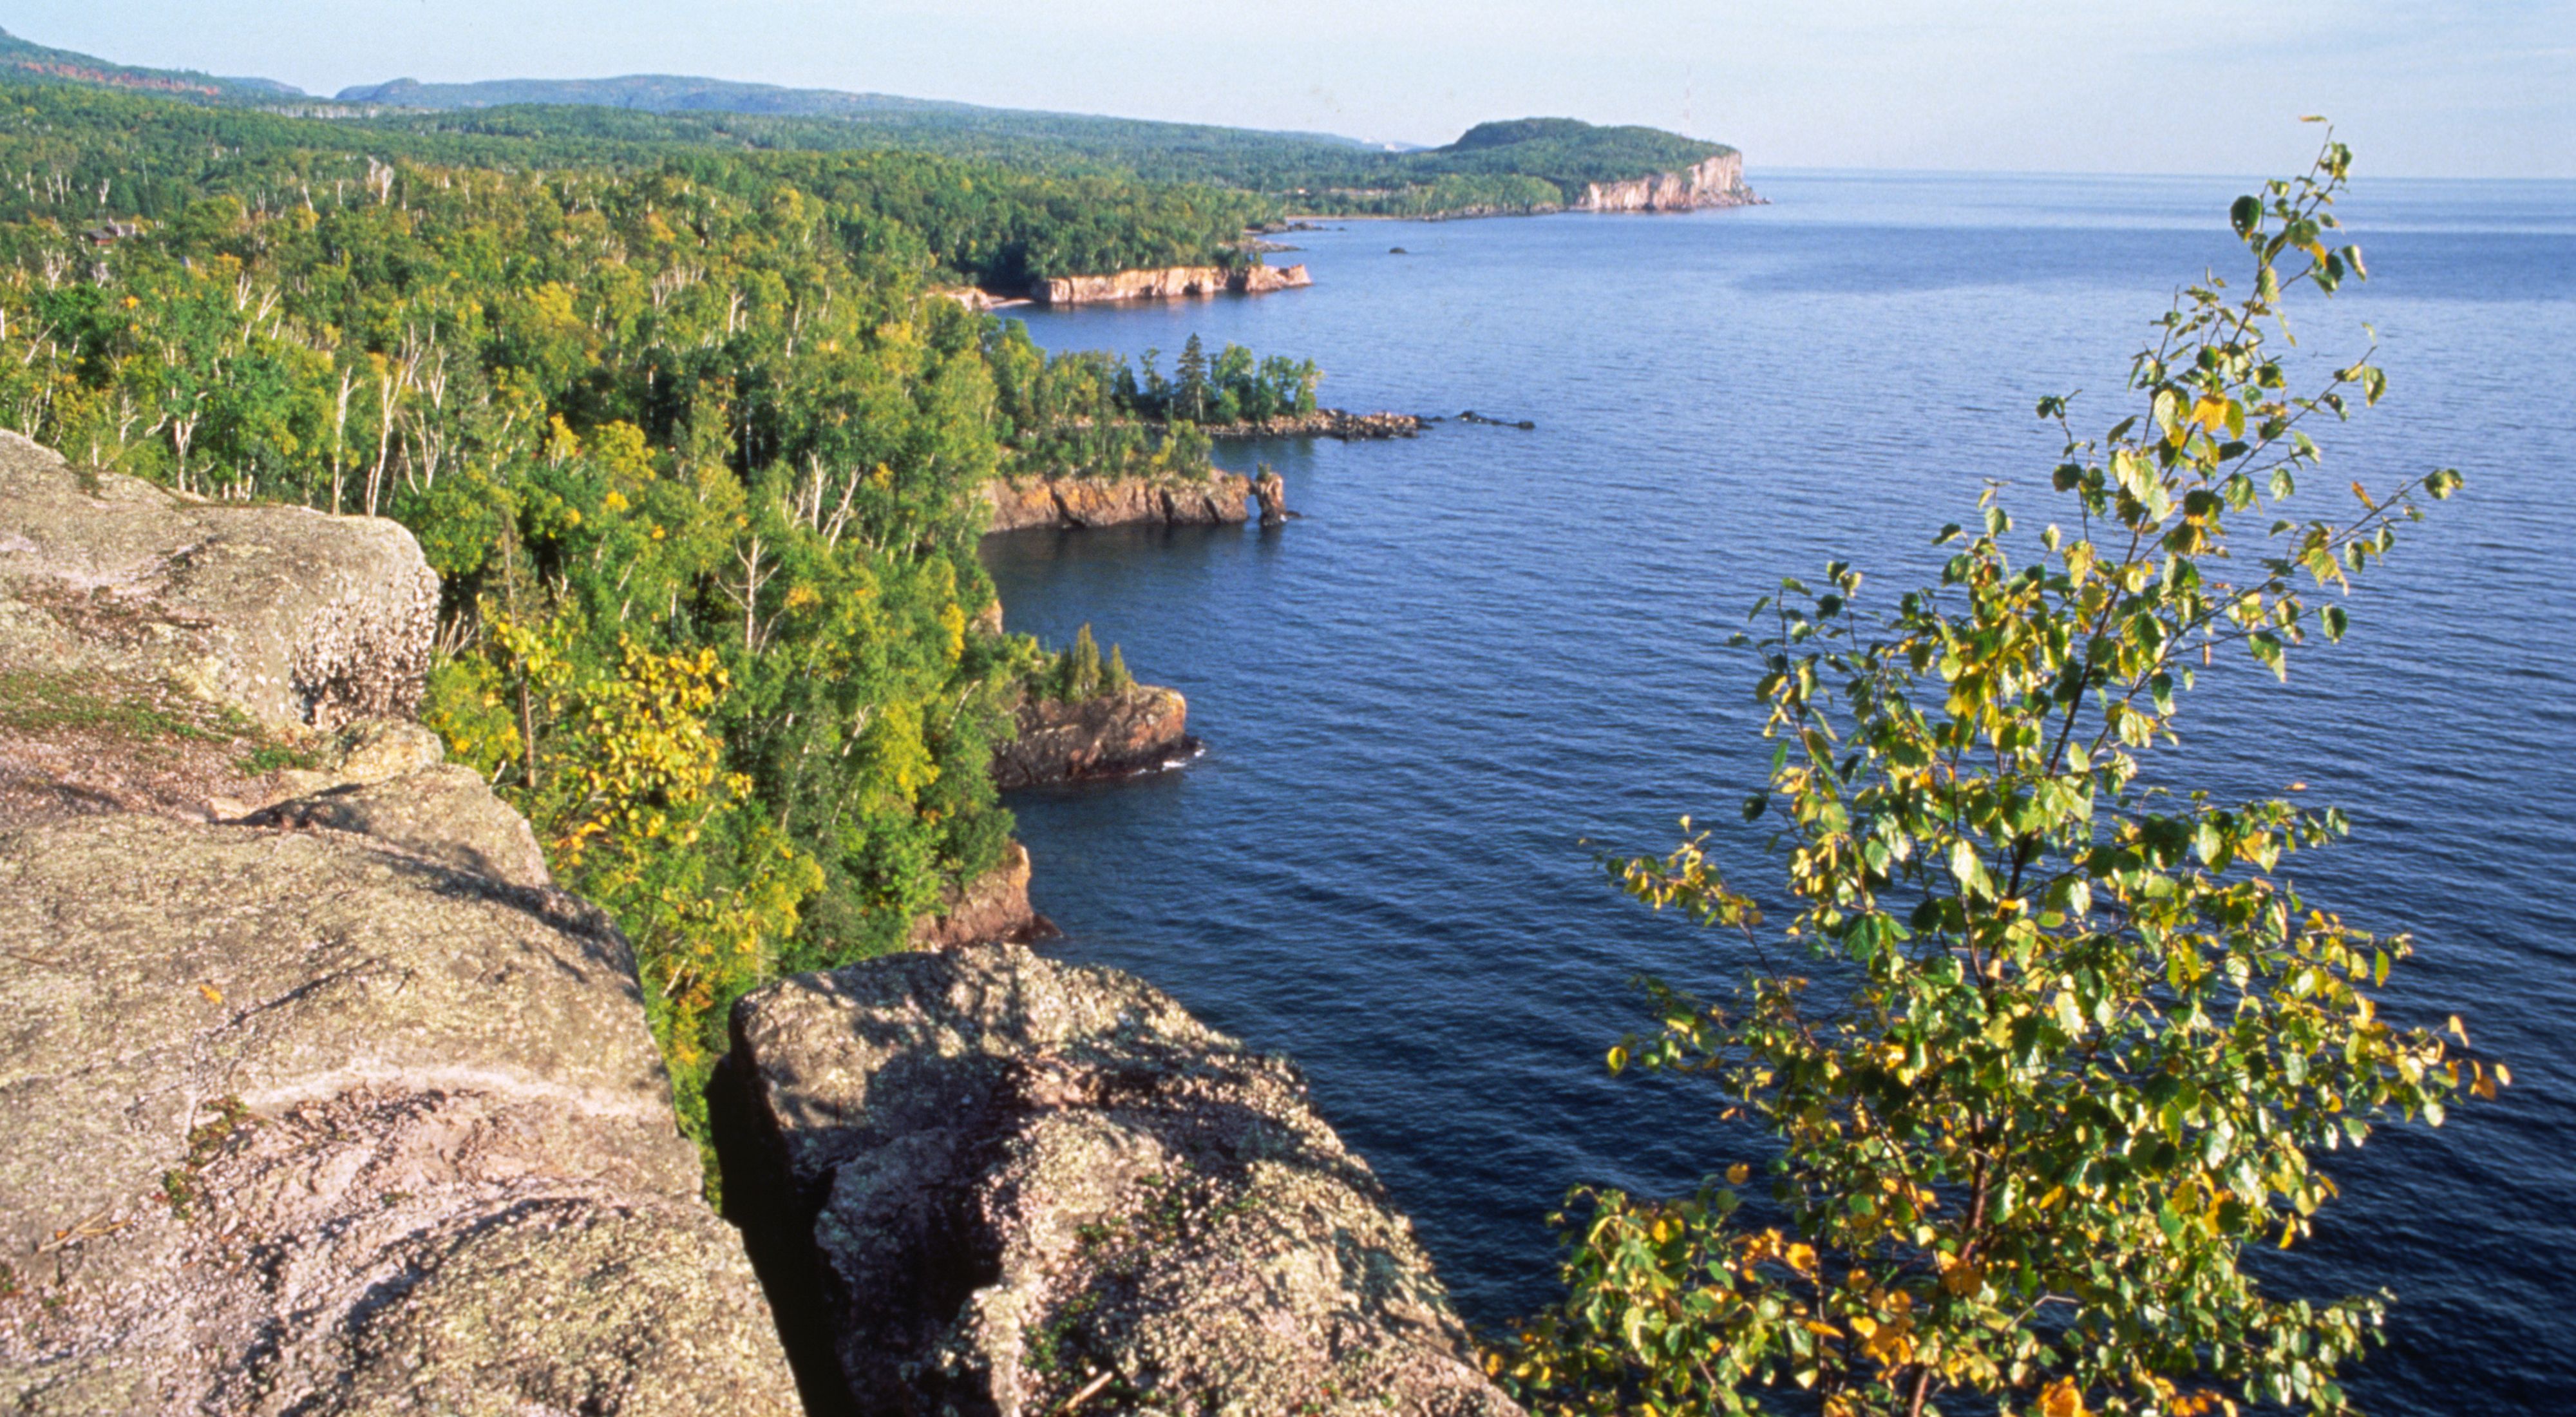 along Lake Superior in Minnesota. Shoreline like this along the Great Lakes is highly resistant to climate change.